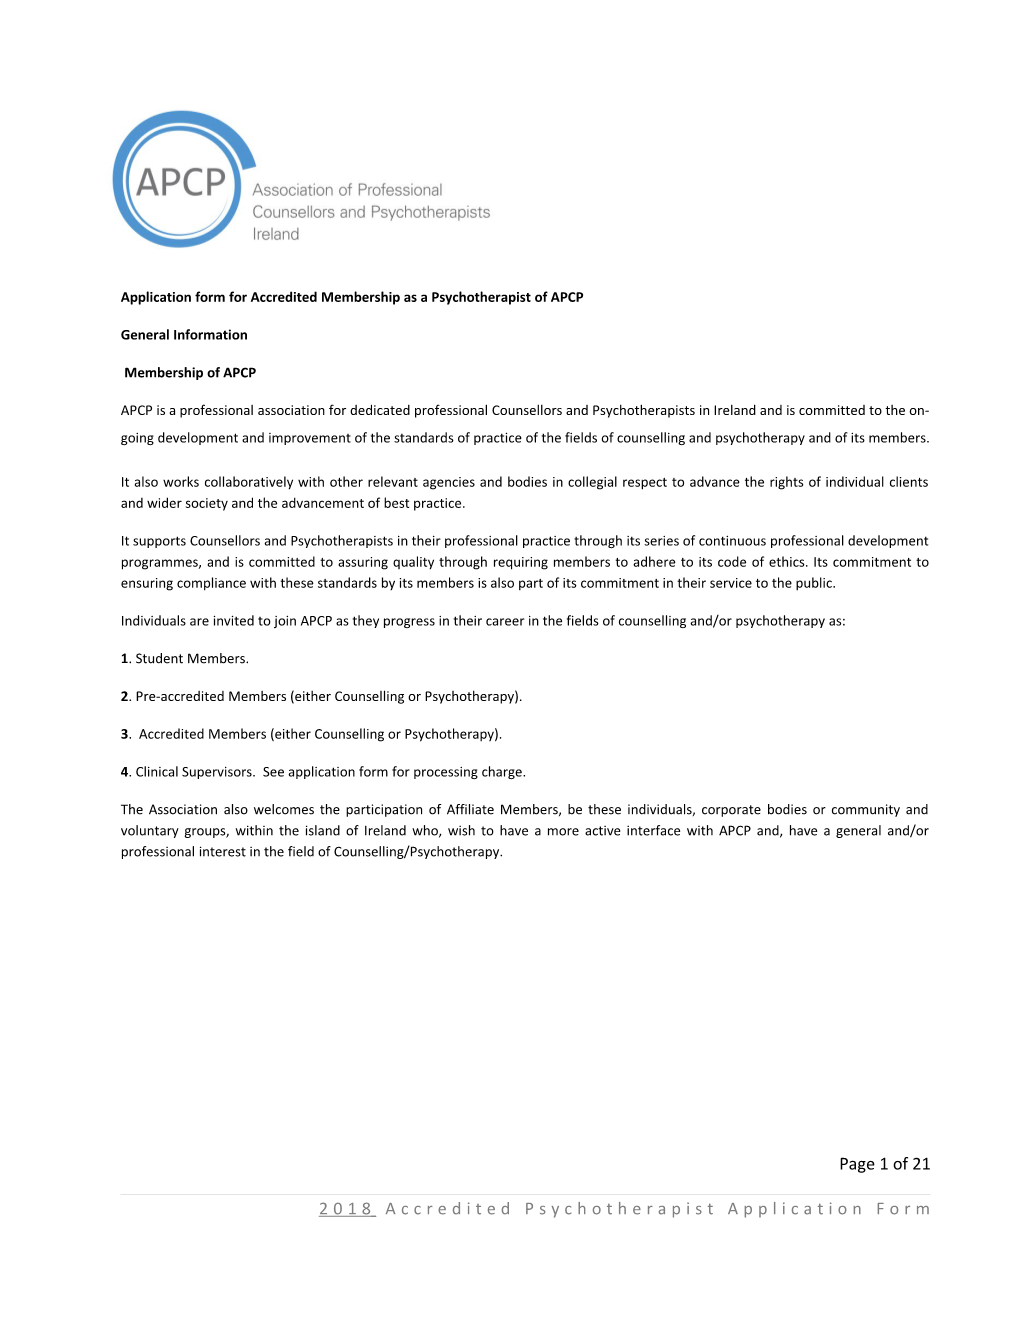 Application Form Foraccredited Membership As a Psychotherapistof APCP